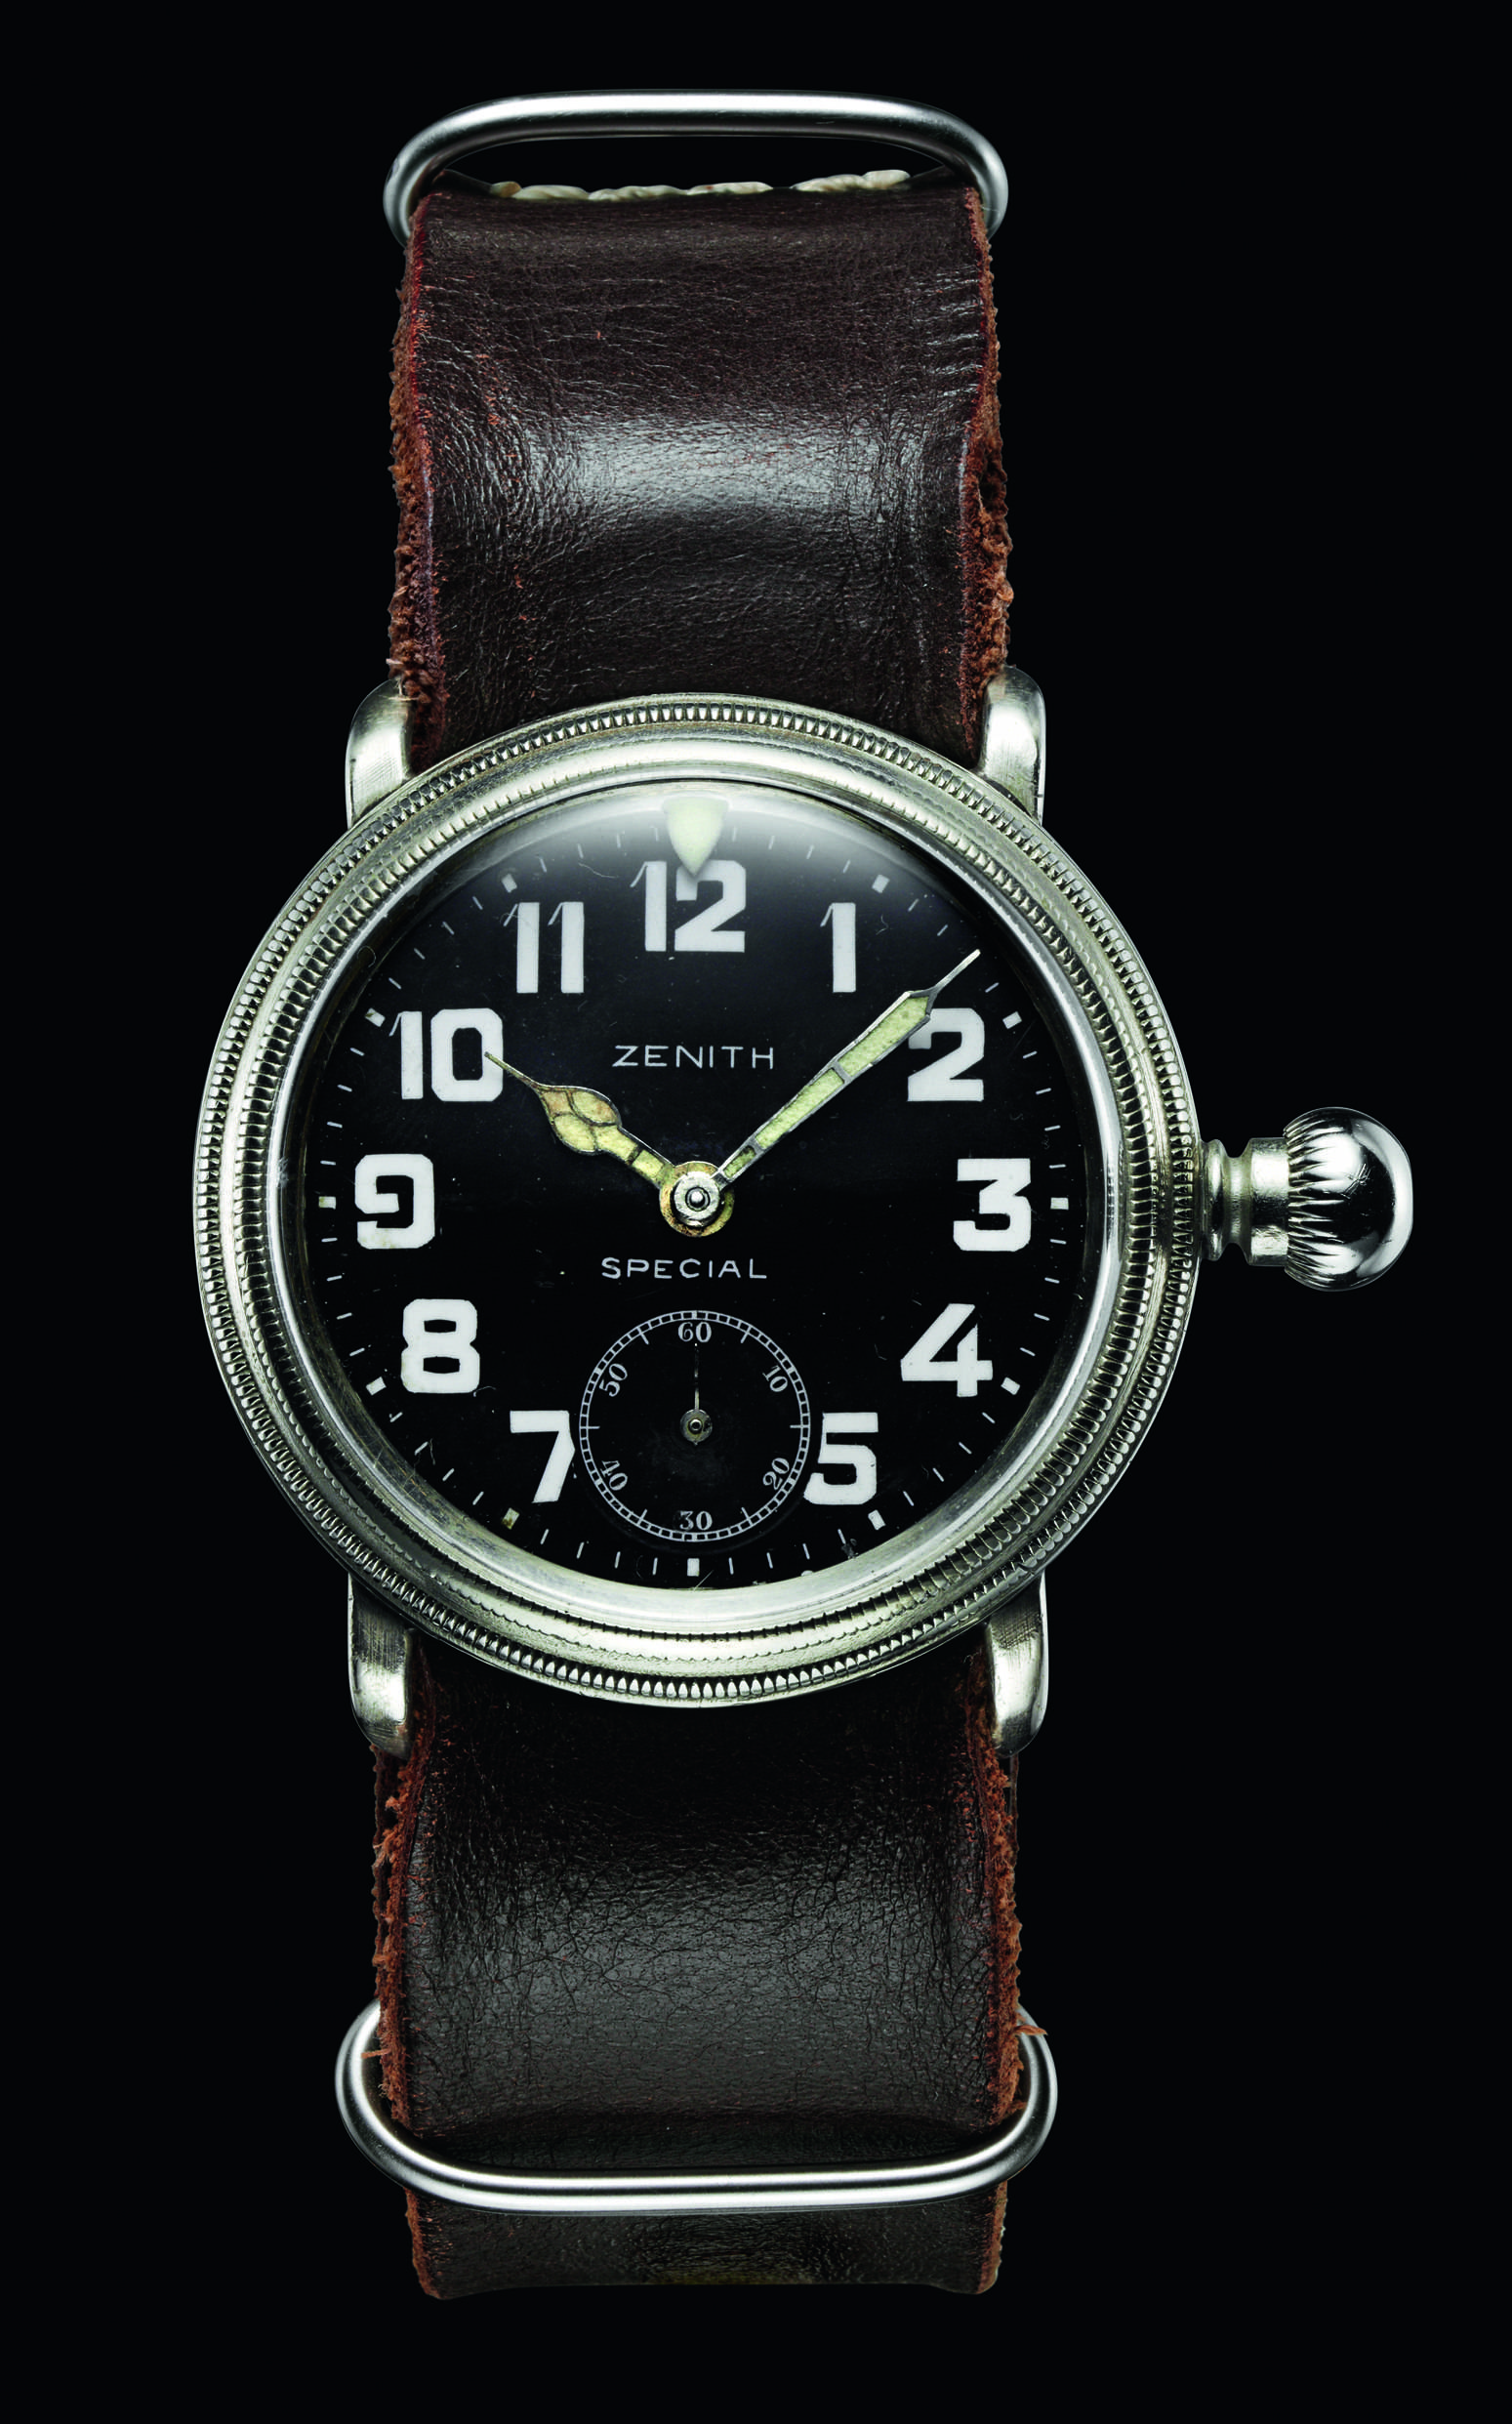 Throwback Thursday: The Zenith Type 20 and the Louis Blériot Watch